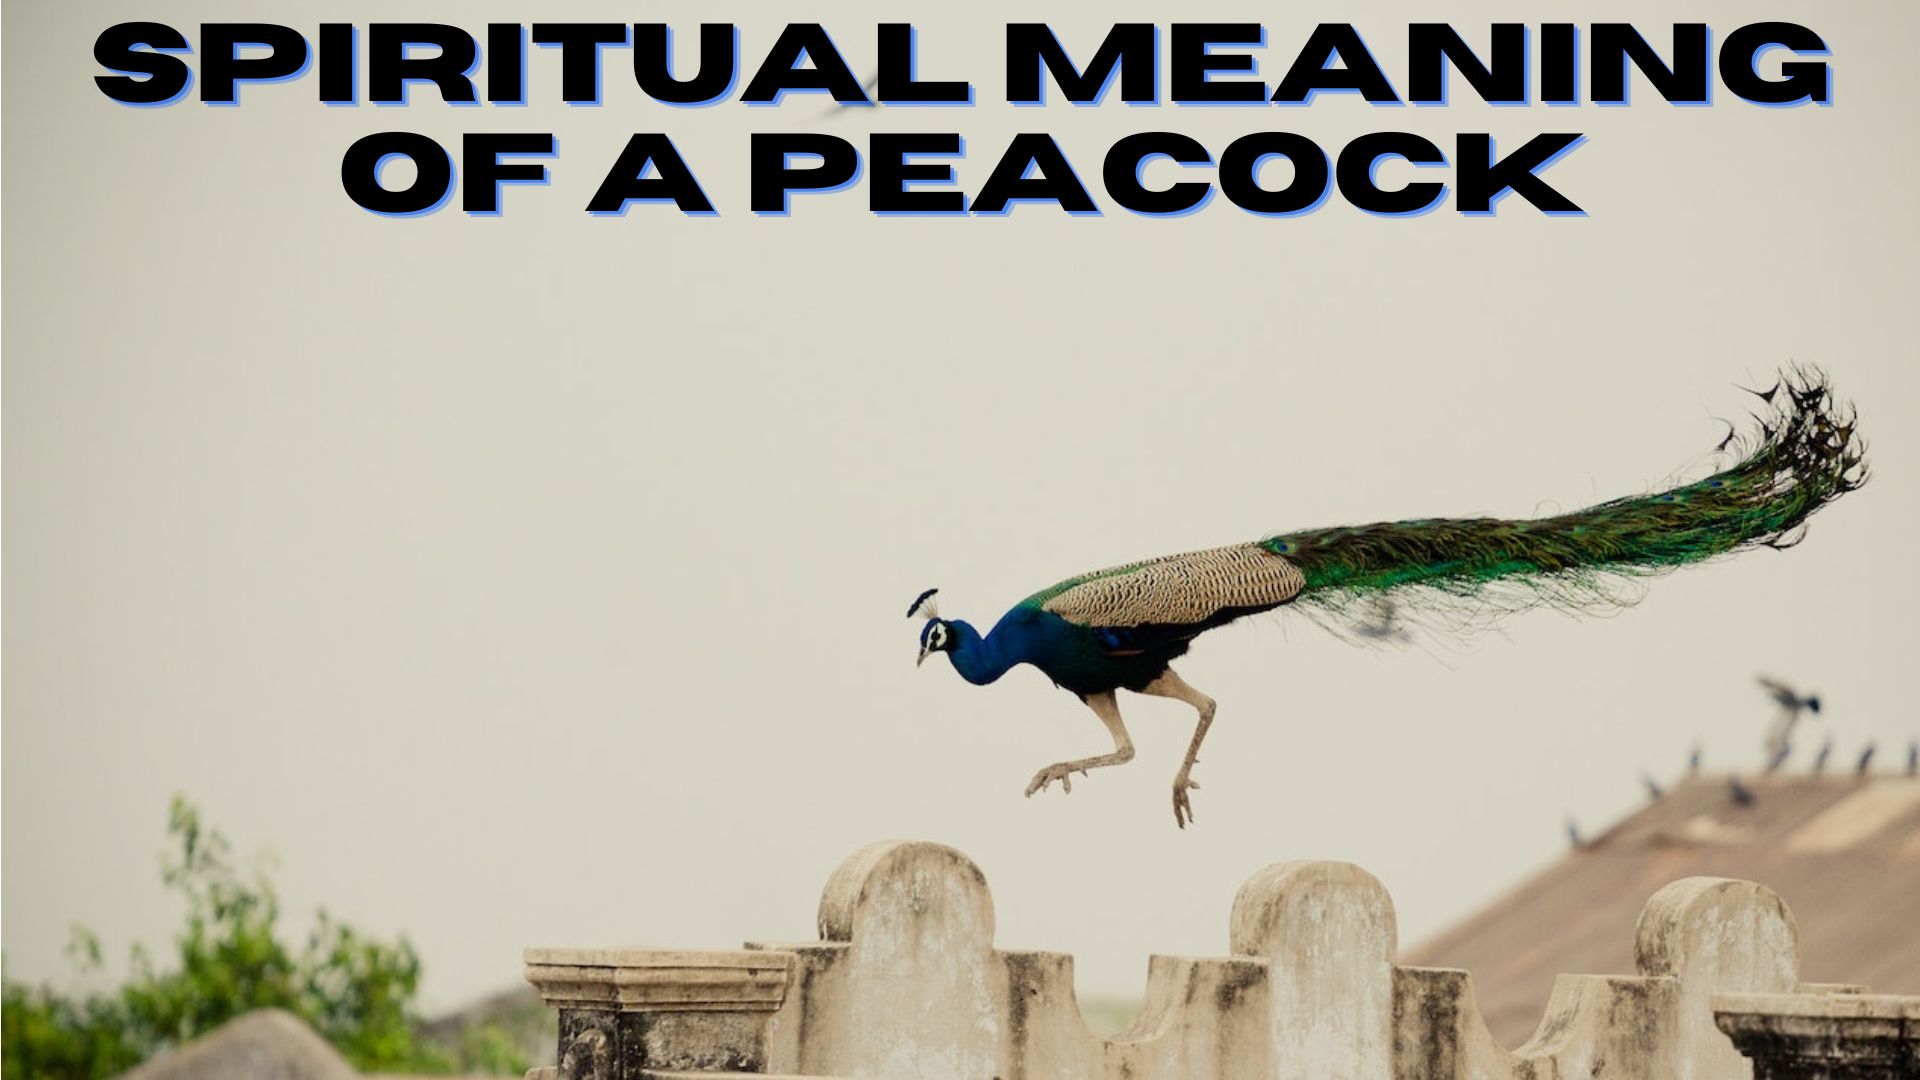 Spiritual Meaning Of A Peacock - Representation Of Strength, Authority, Assurance, And Even Divinity 